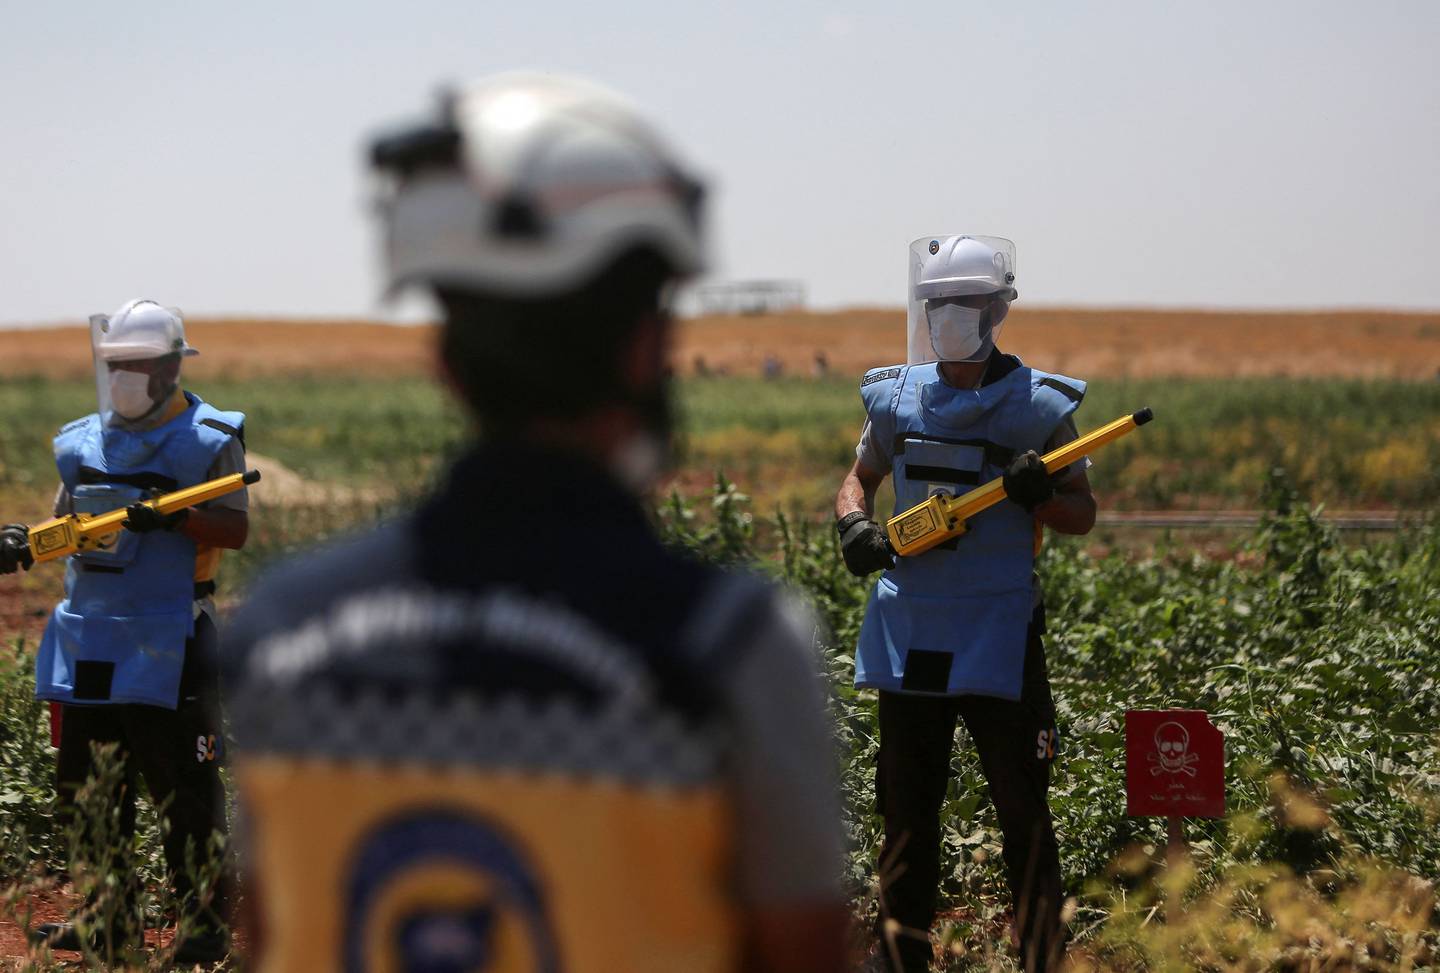 Members of White Helmets, equipped with protective outfits, get ready to search and neutralise unexploded weapons in a field in Syria's northern Aleppo province in June. AFP